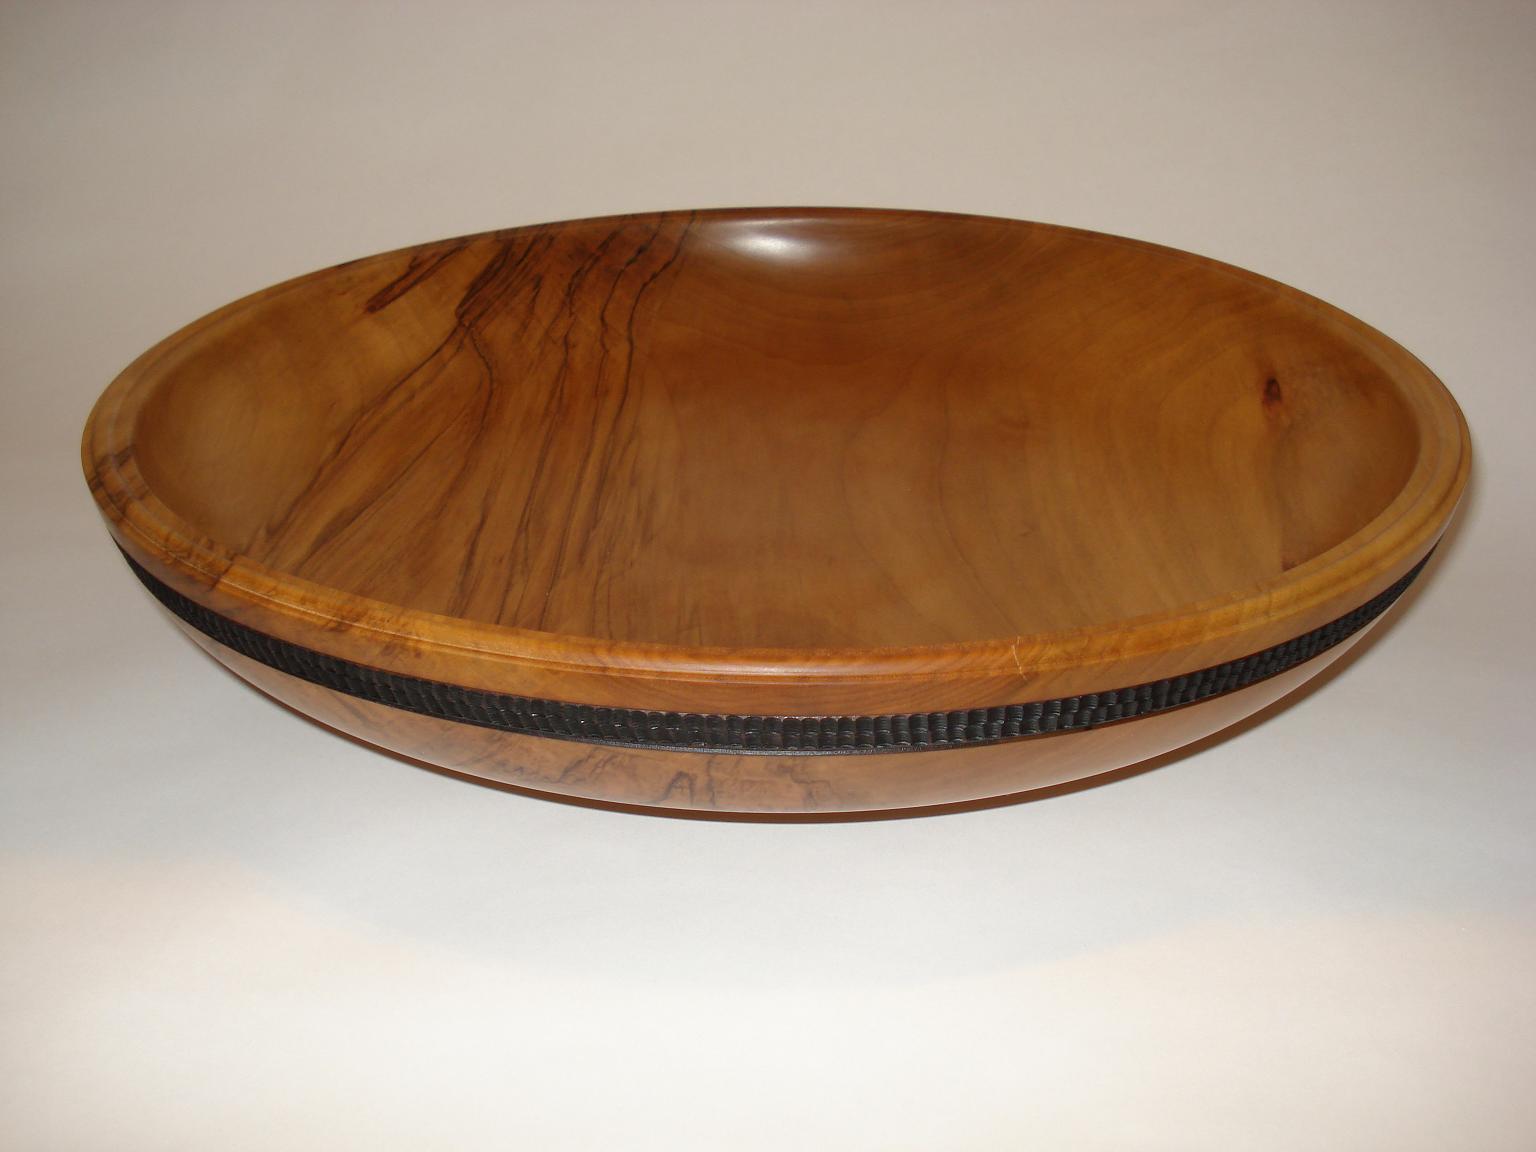 16" Sweetgum Bowl with burnt textured band - SOLD!